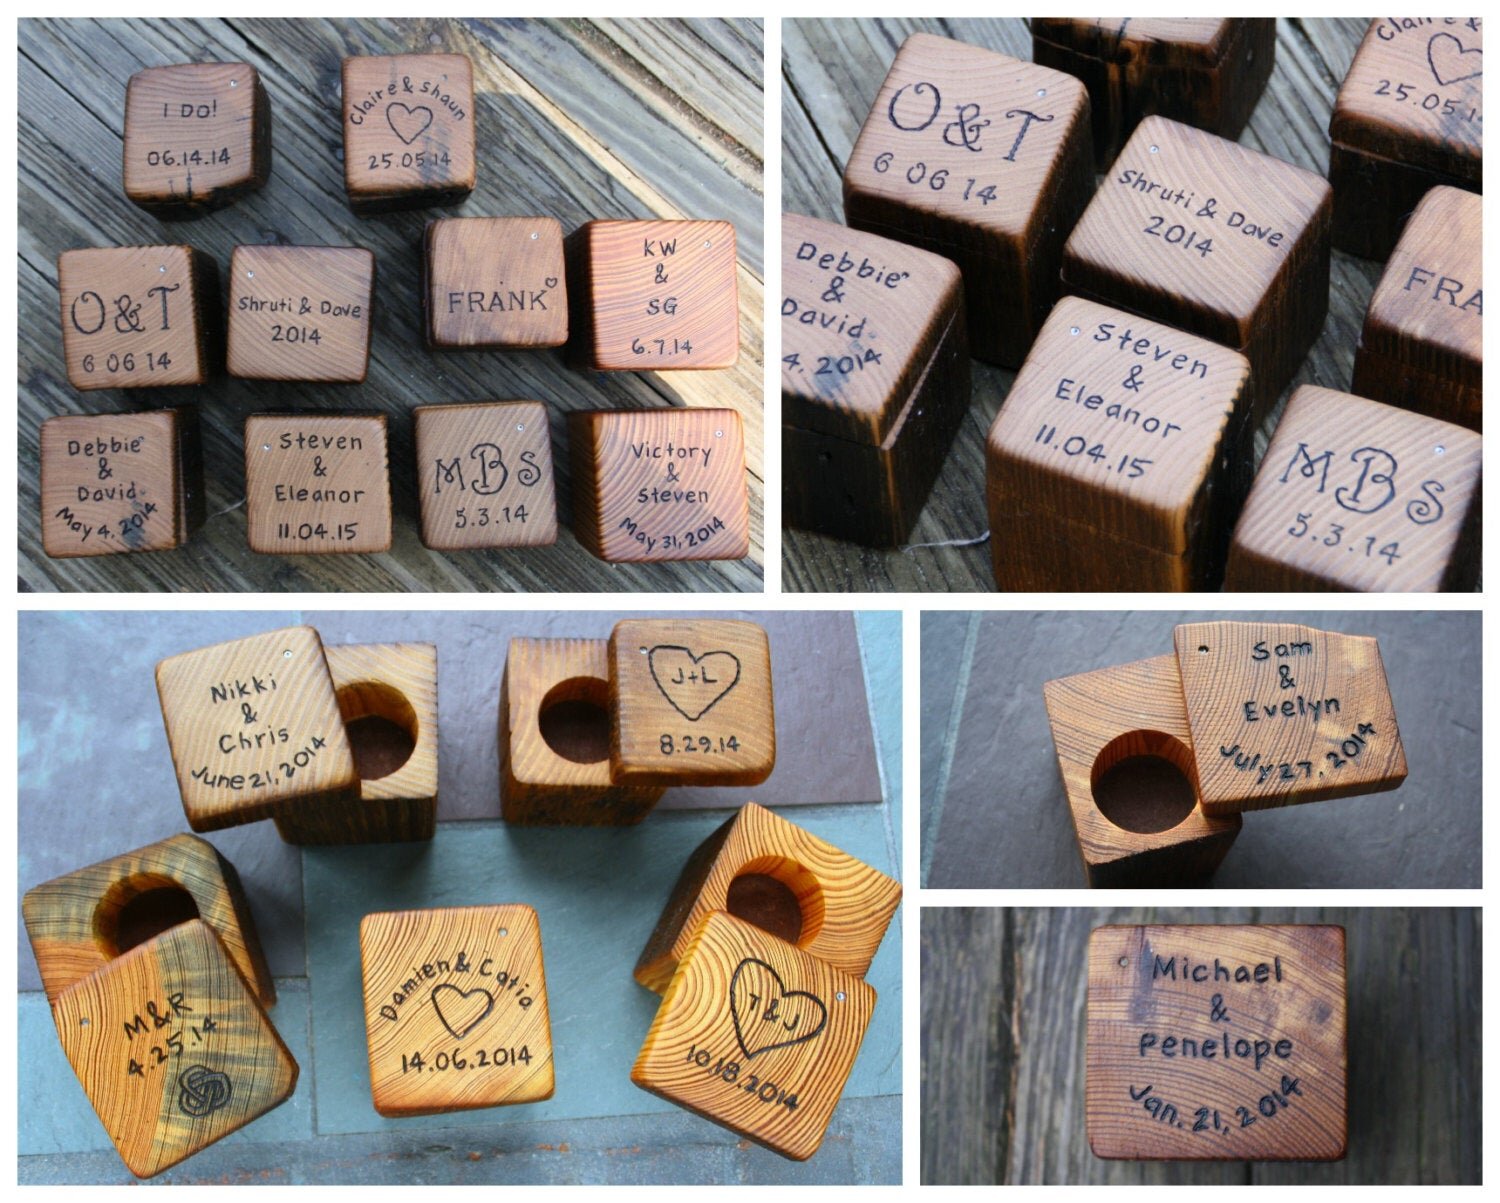 Personalized wedding favors engraved wedding favors rustic